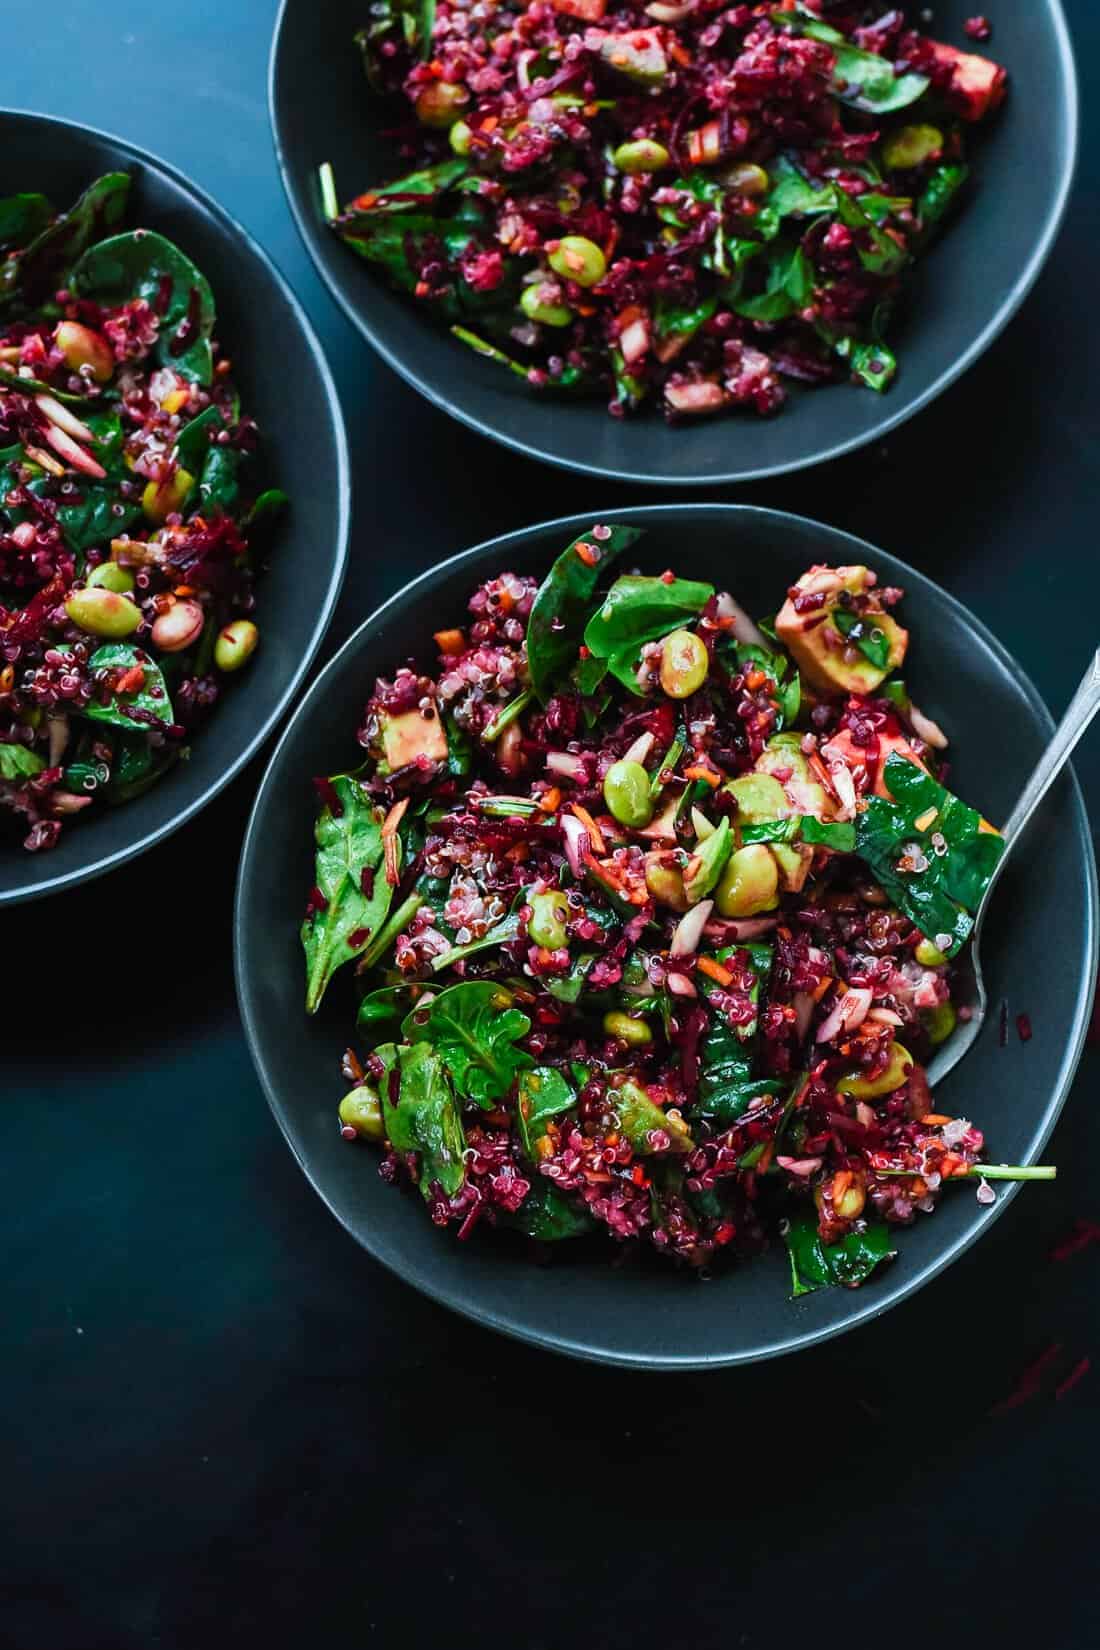 beets with quinoa, carrots and greens in a bowl